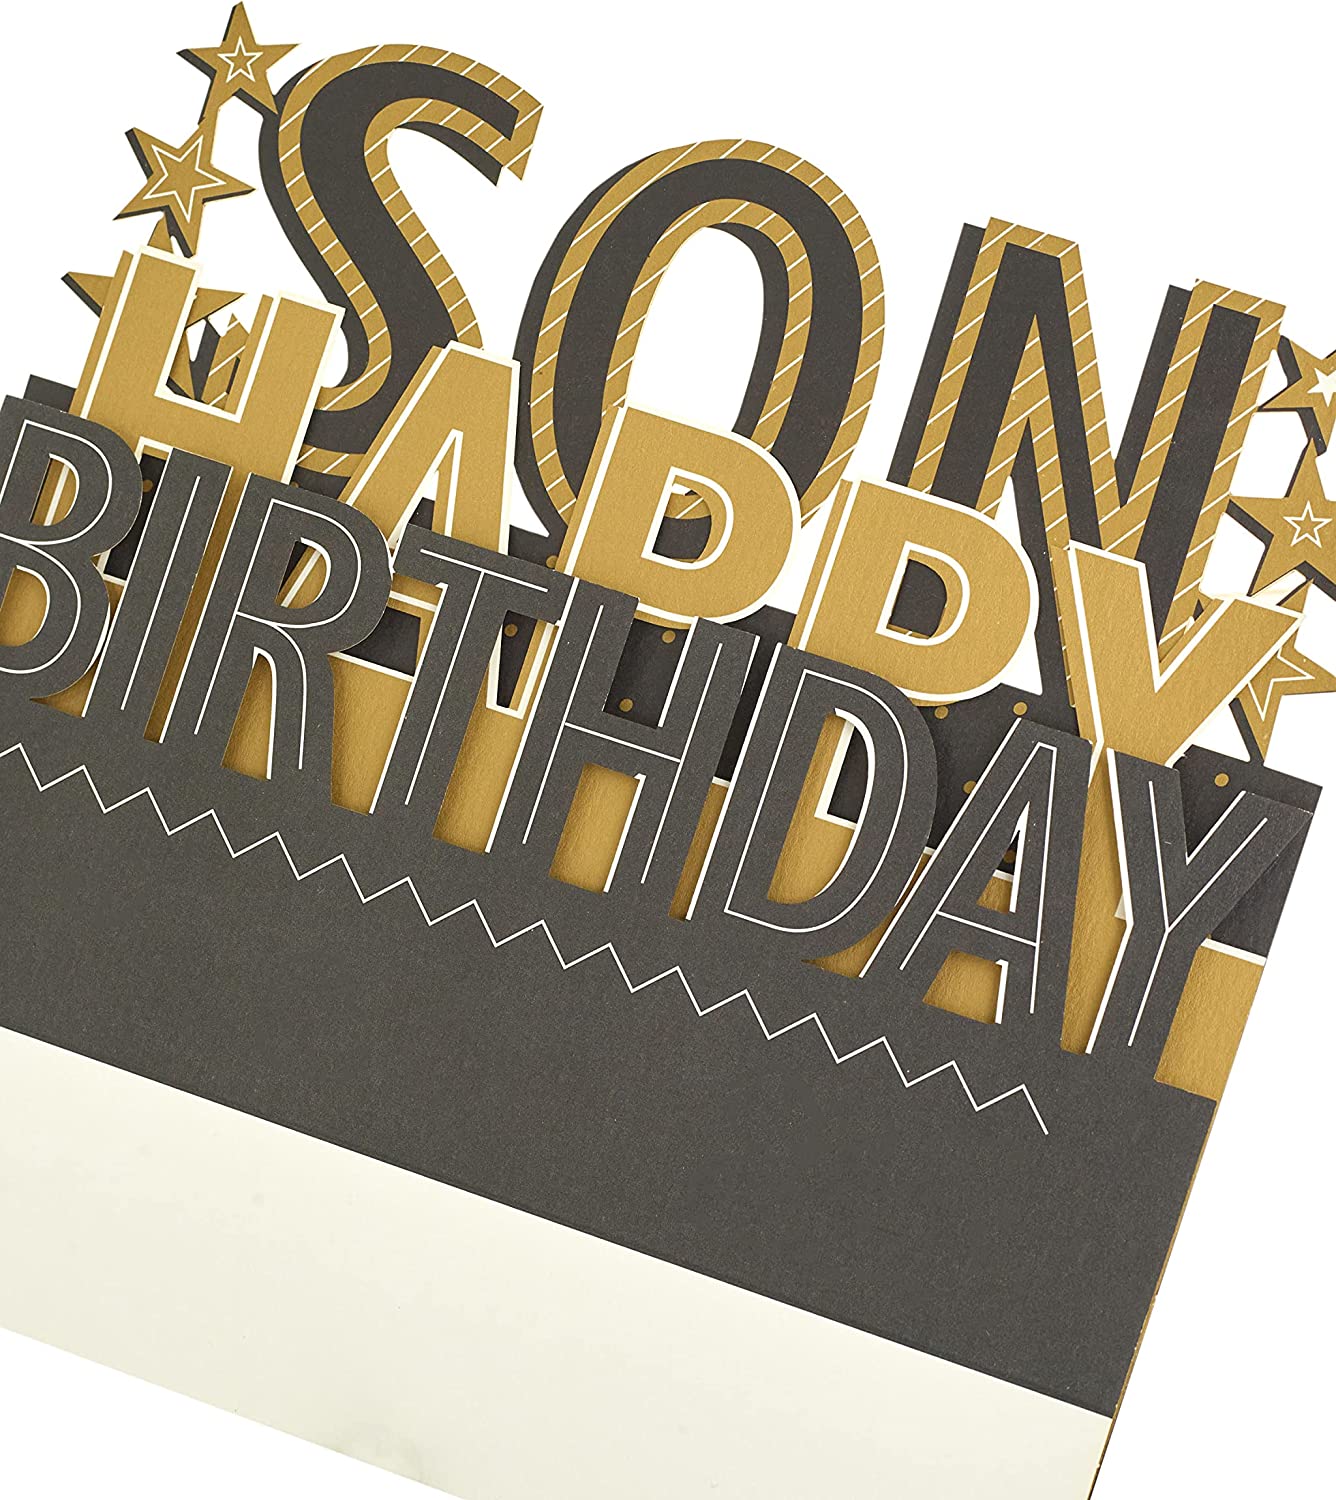 Sweet Design with Pop-Up 3D Lettering Son Birthday Card